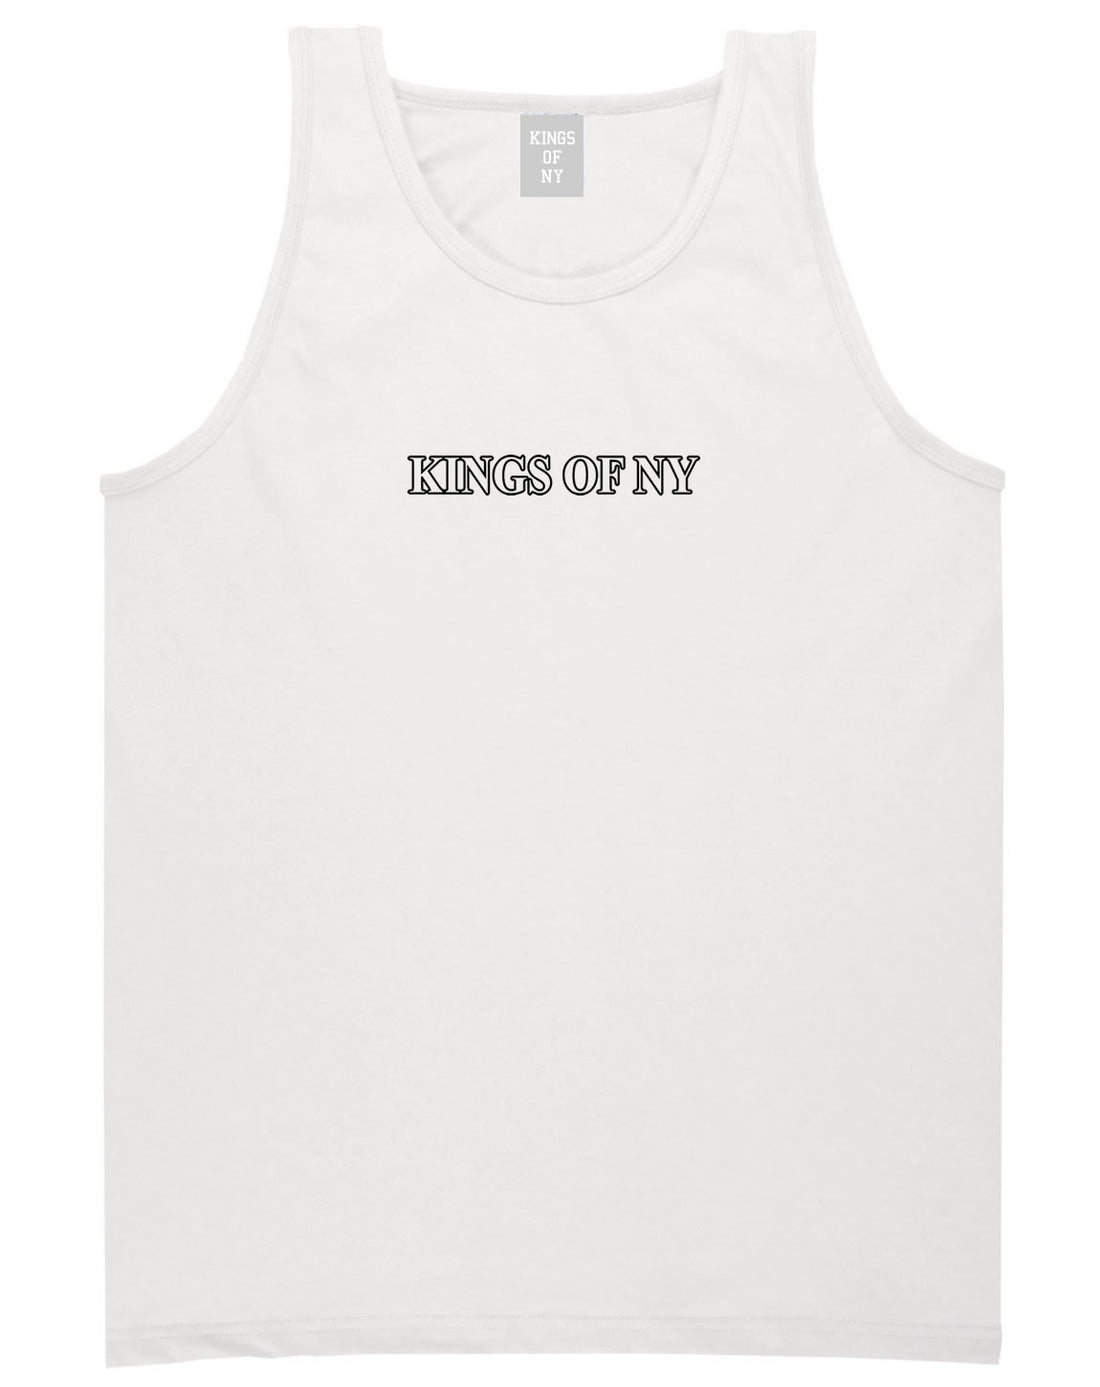 Kings Of NY Outline Classic Logo Mens Tank Top Shirt White